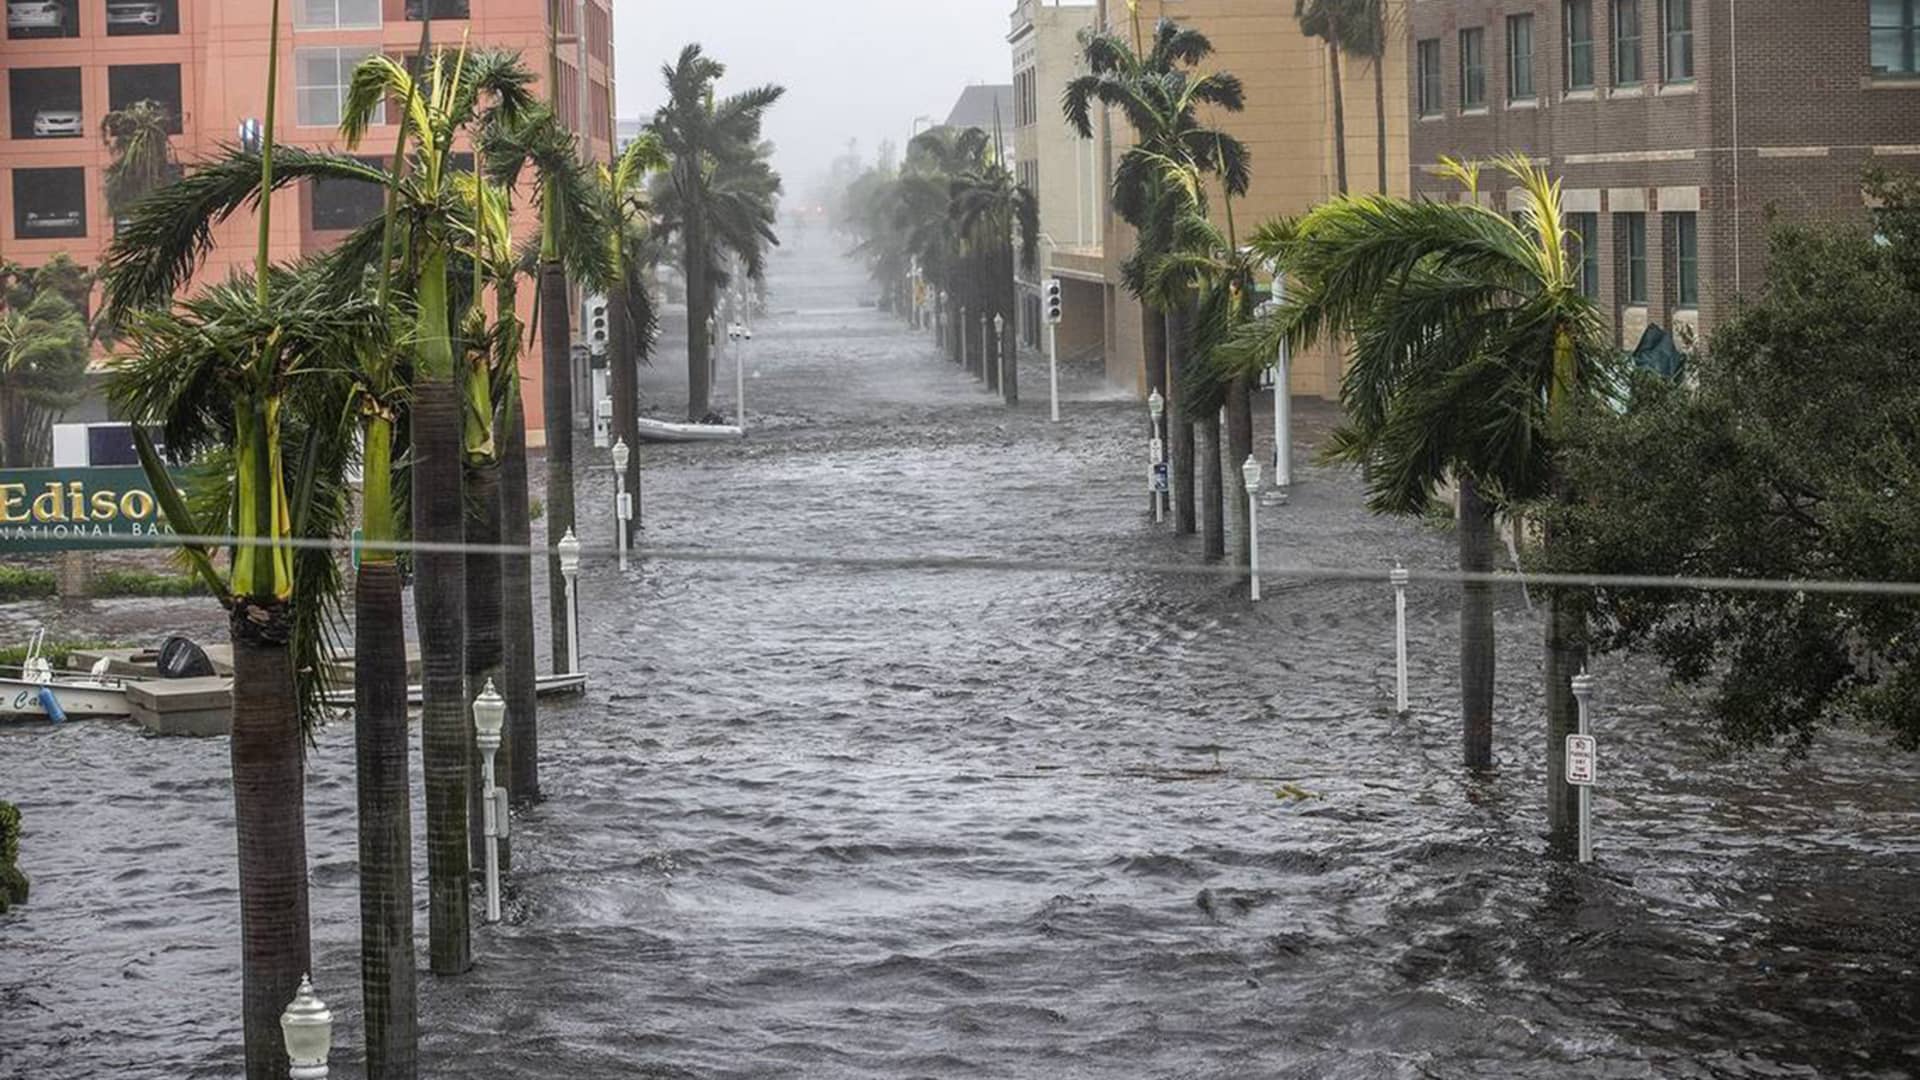 In September, the streets of downtown Fort Myers were flooded from Hurricane Ian. This sort of damage can disrupt medical and food supply chains that can raise health risks for diabetics as well as others with chronic diseases. Itâs one of the surprising impacts from climate change that Florida and other coastal states face.